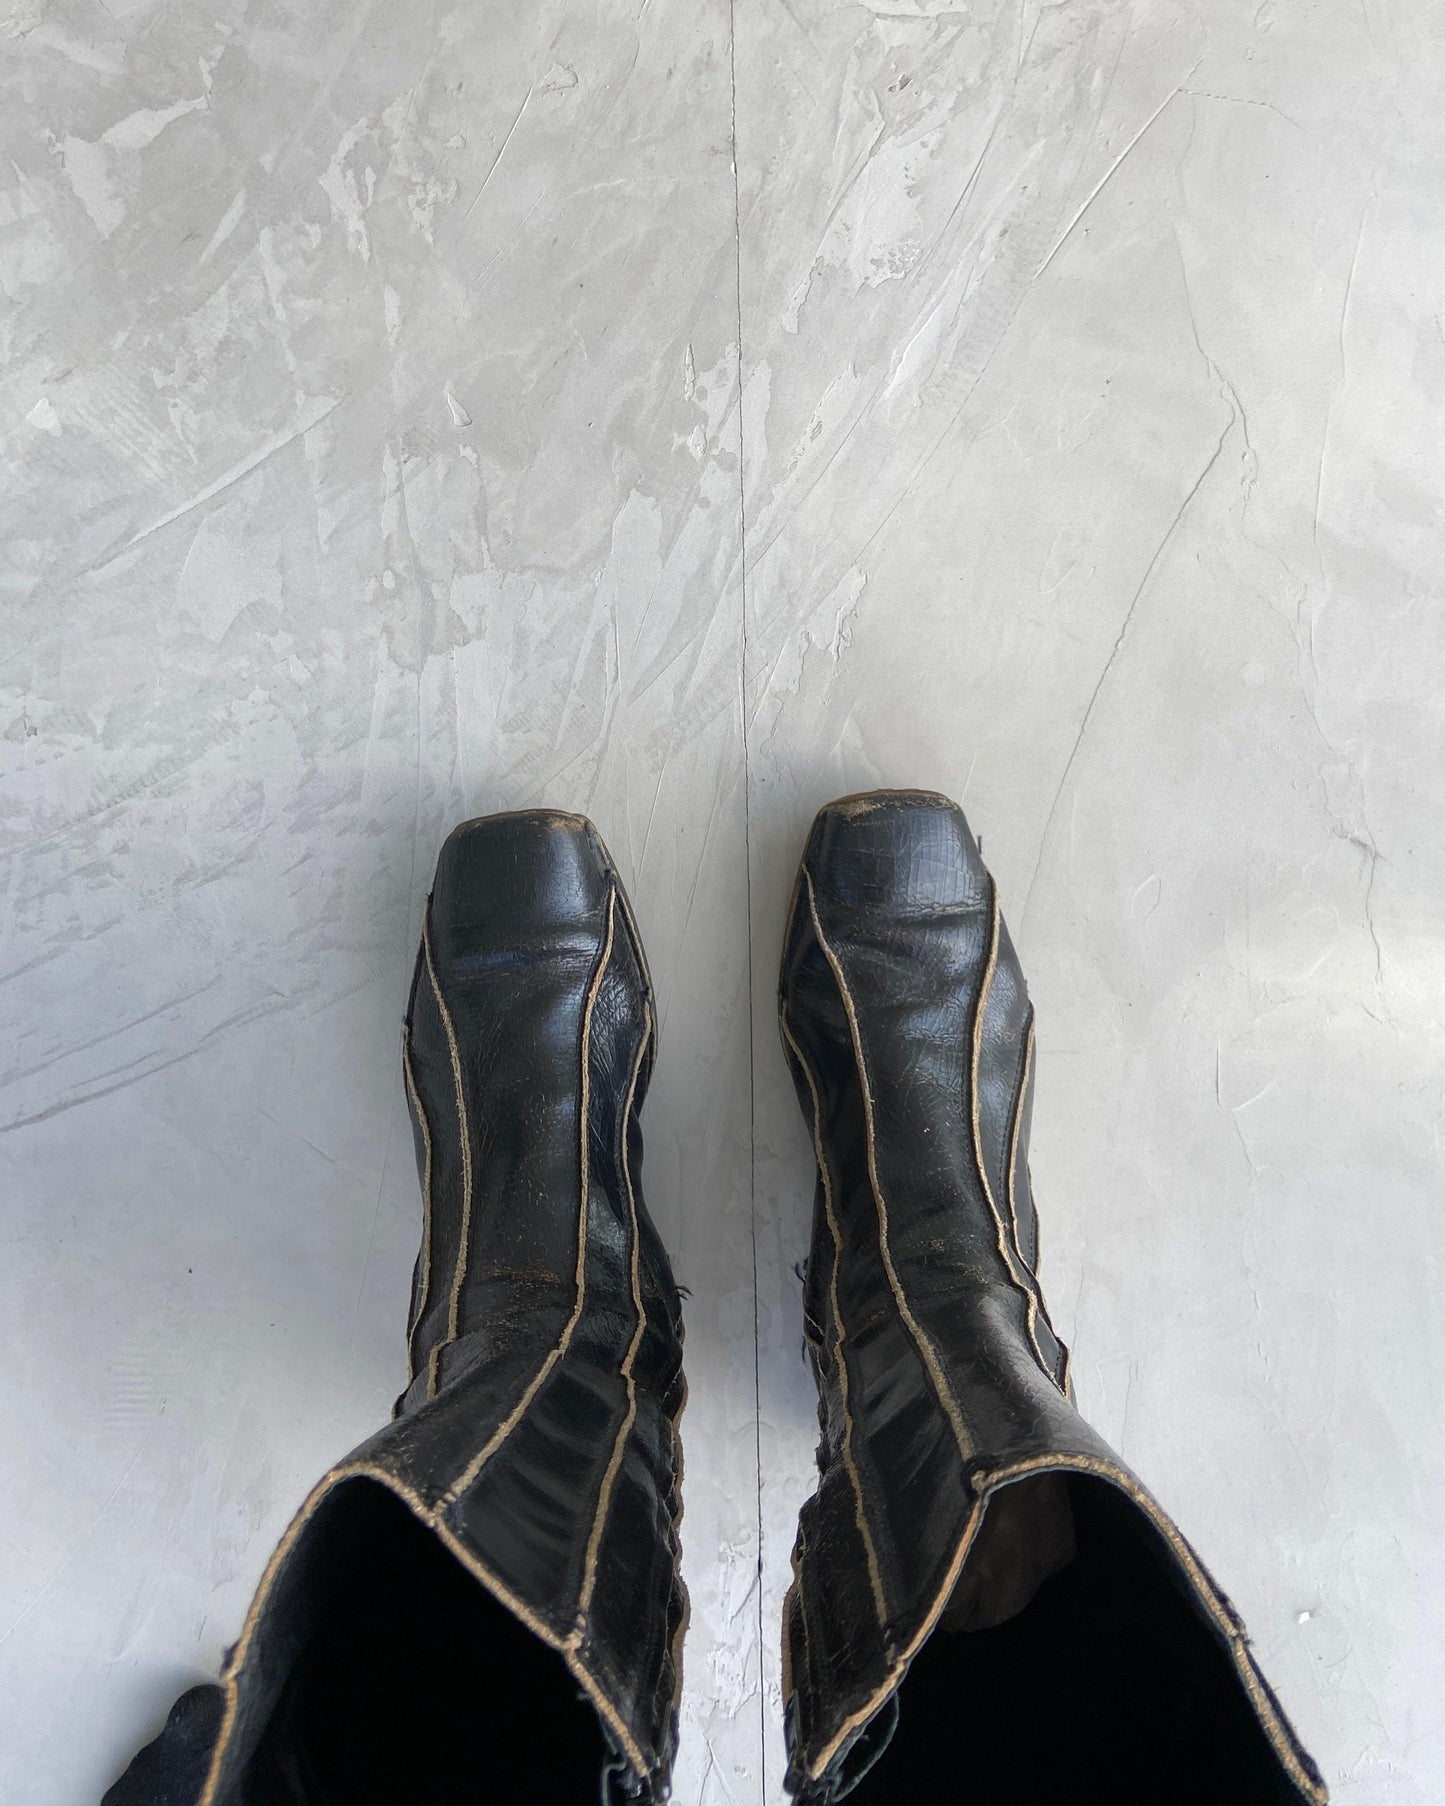 DIESEL 90'S CRACKED LEATHER SQUARE TOE BOOTS - UK 8 - Known Source